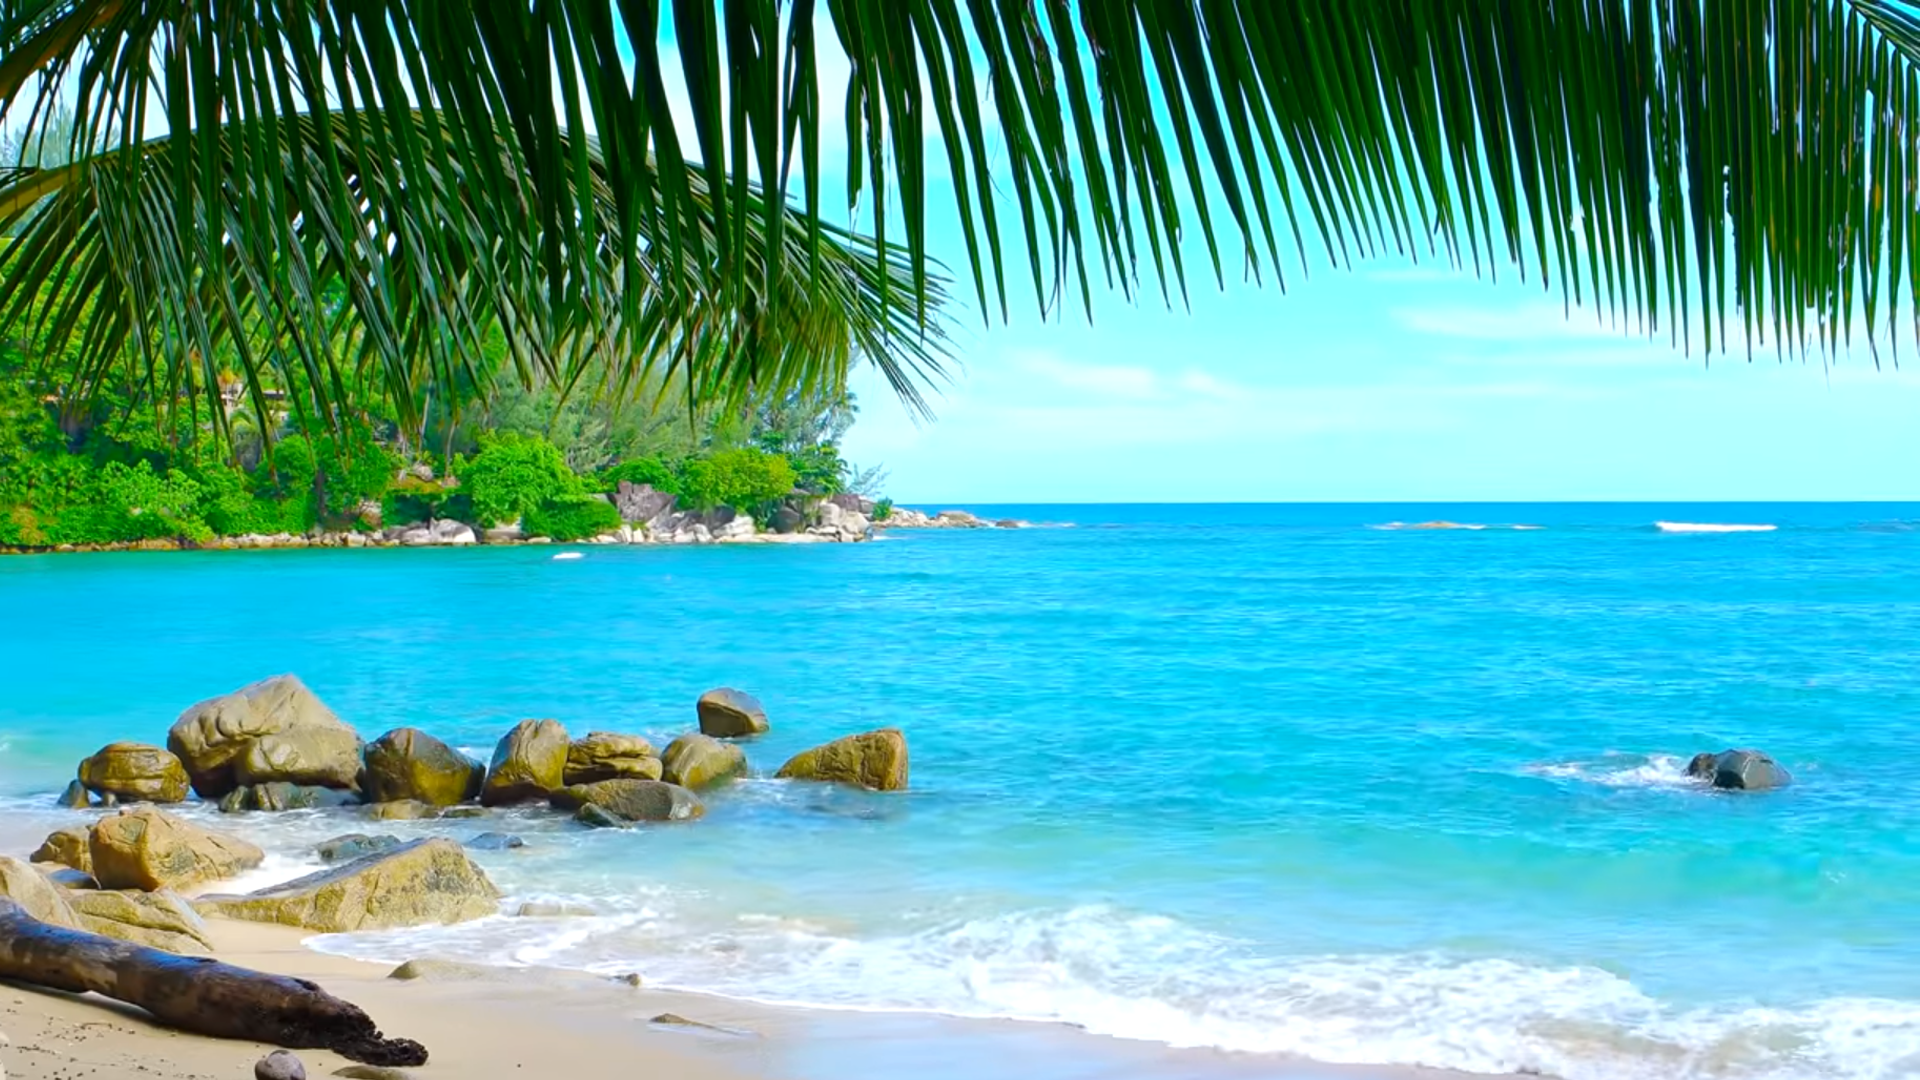 10 Best Tropical Beaches You Must Visit in Your Lifetime | Add to